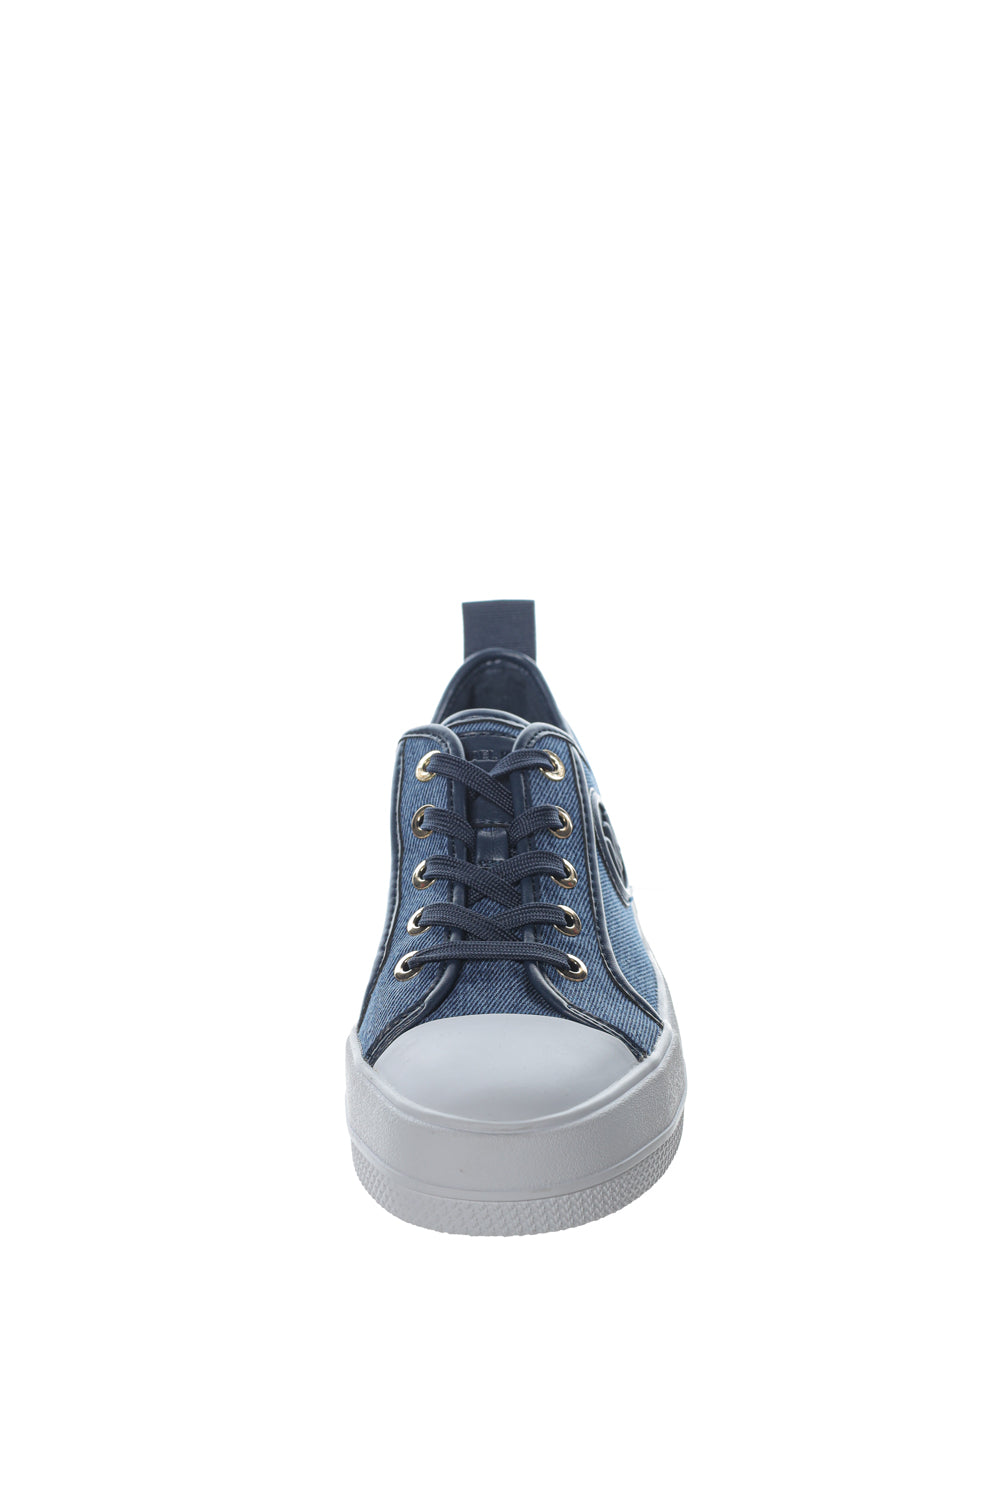 Sneakers Michael Kors Evy Lace Up